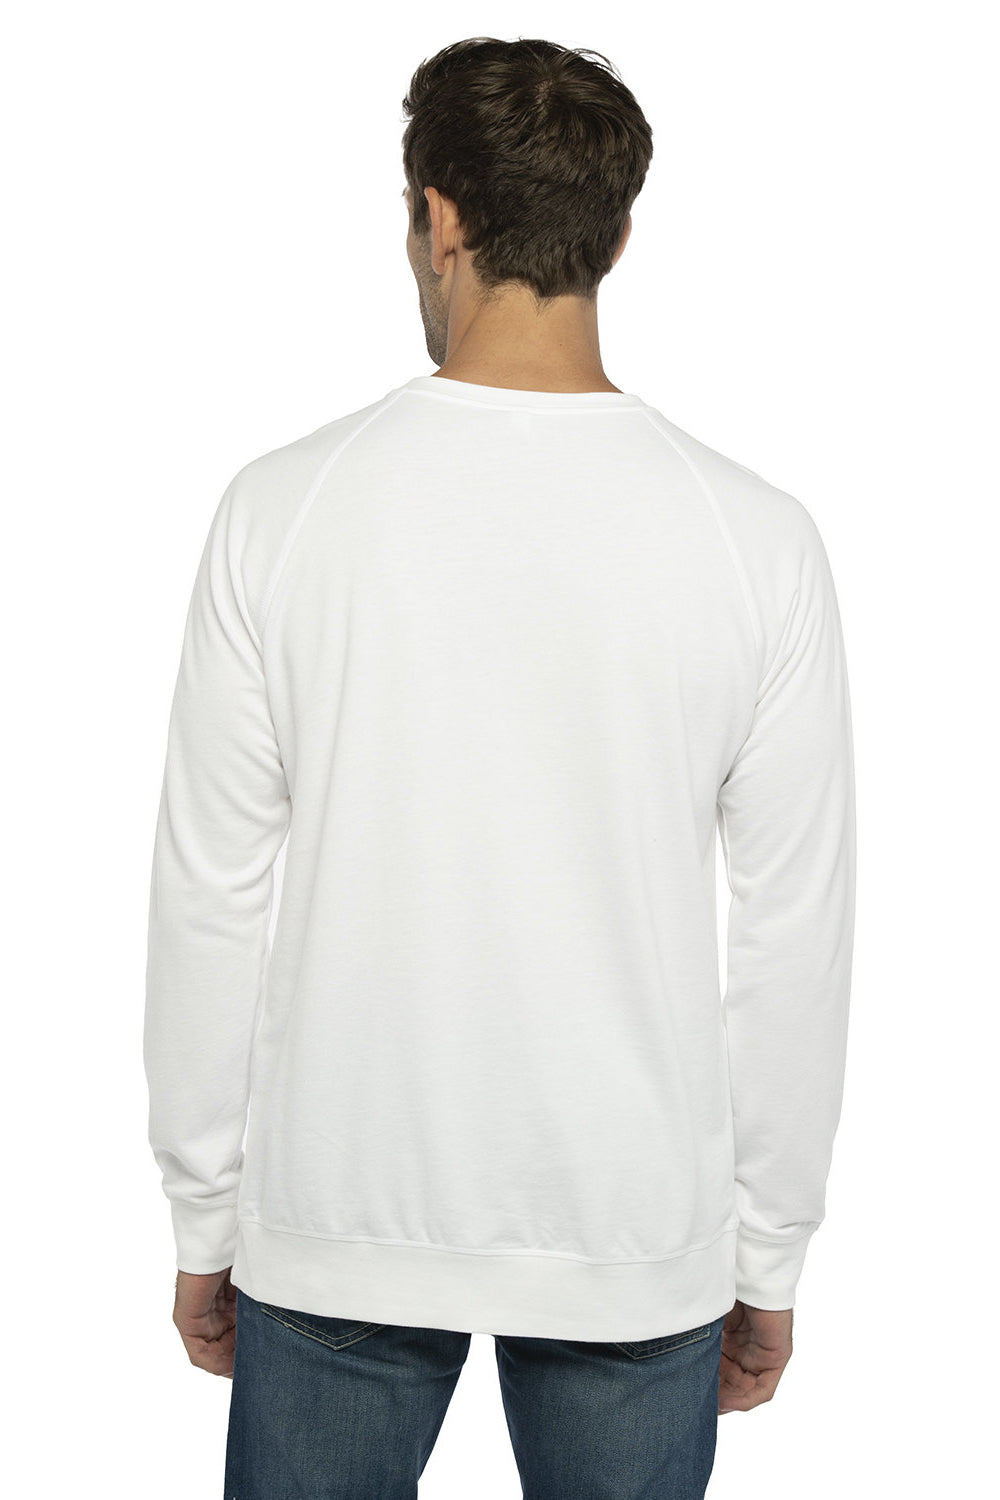 Next Level N9000/9000 Mens French Terry Long Sleeve Crewneck T-Shirt White Back